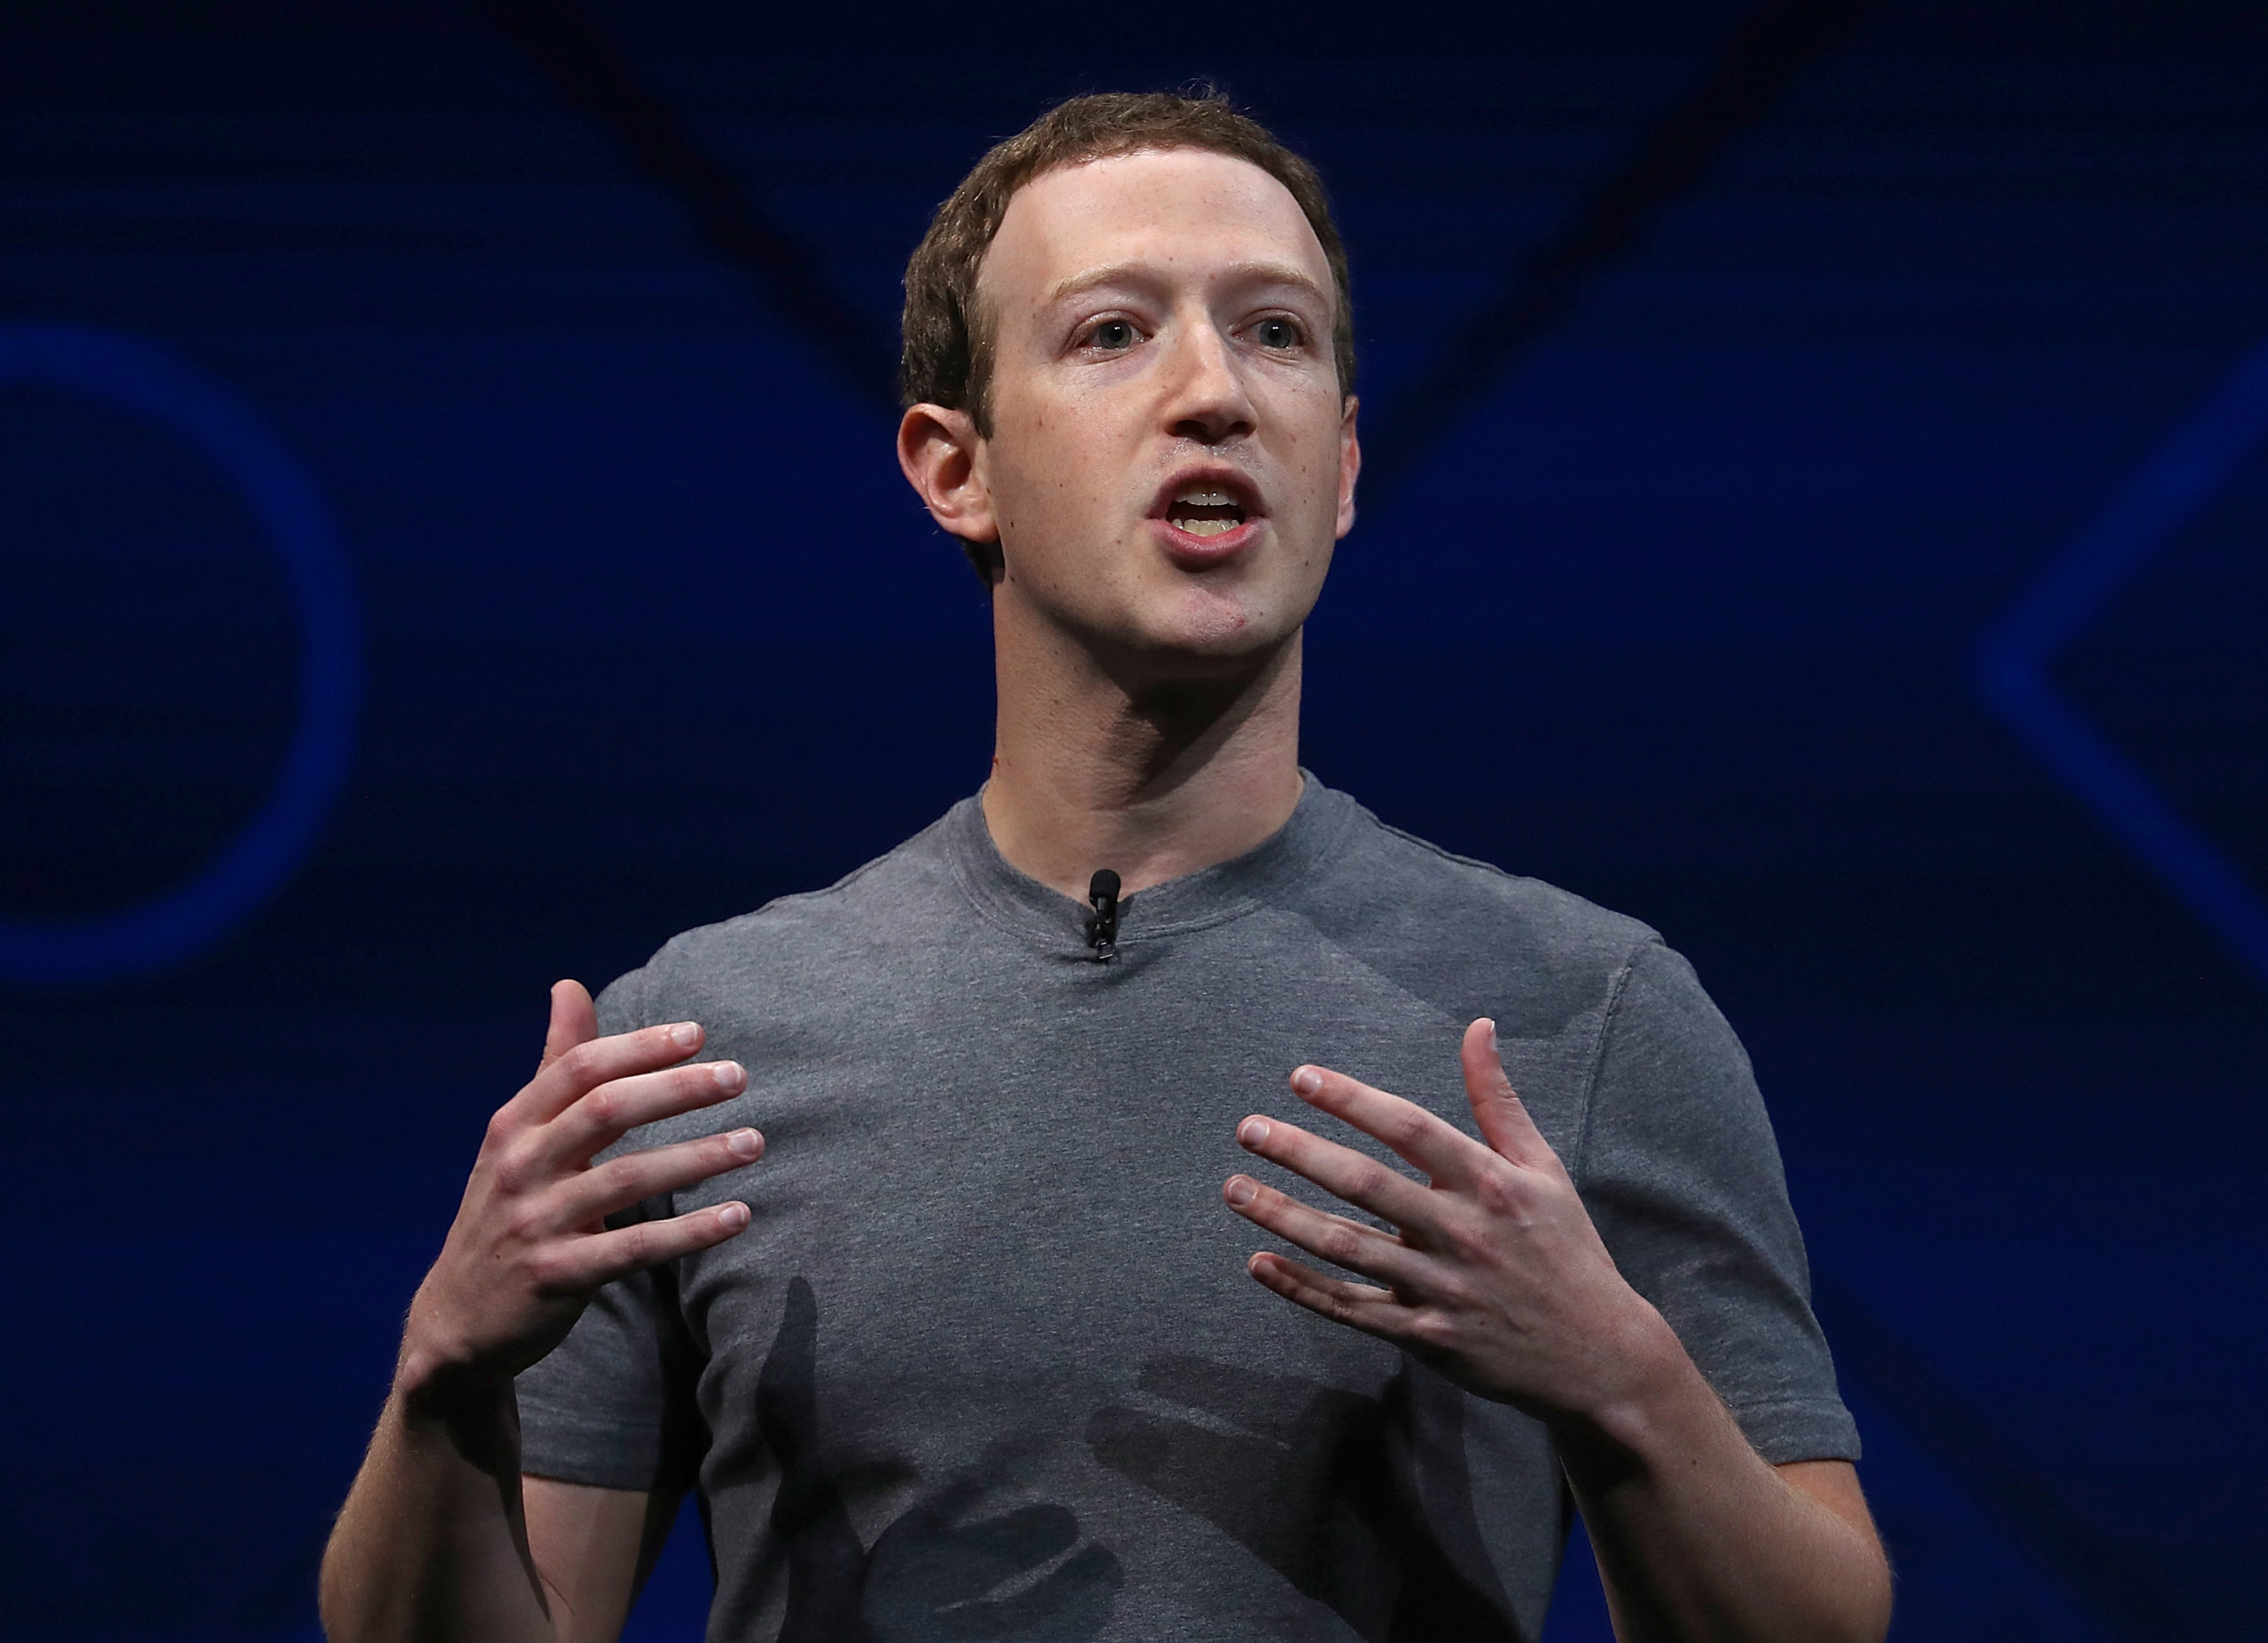 Facebook Expects to Be Fined At Least $5 Billion by Federal Trade Commission Over Privacy Issues